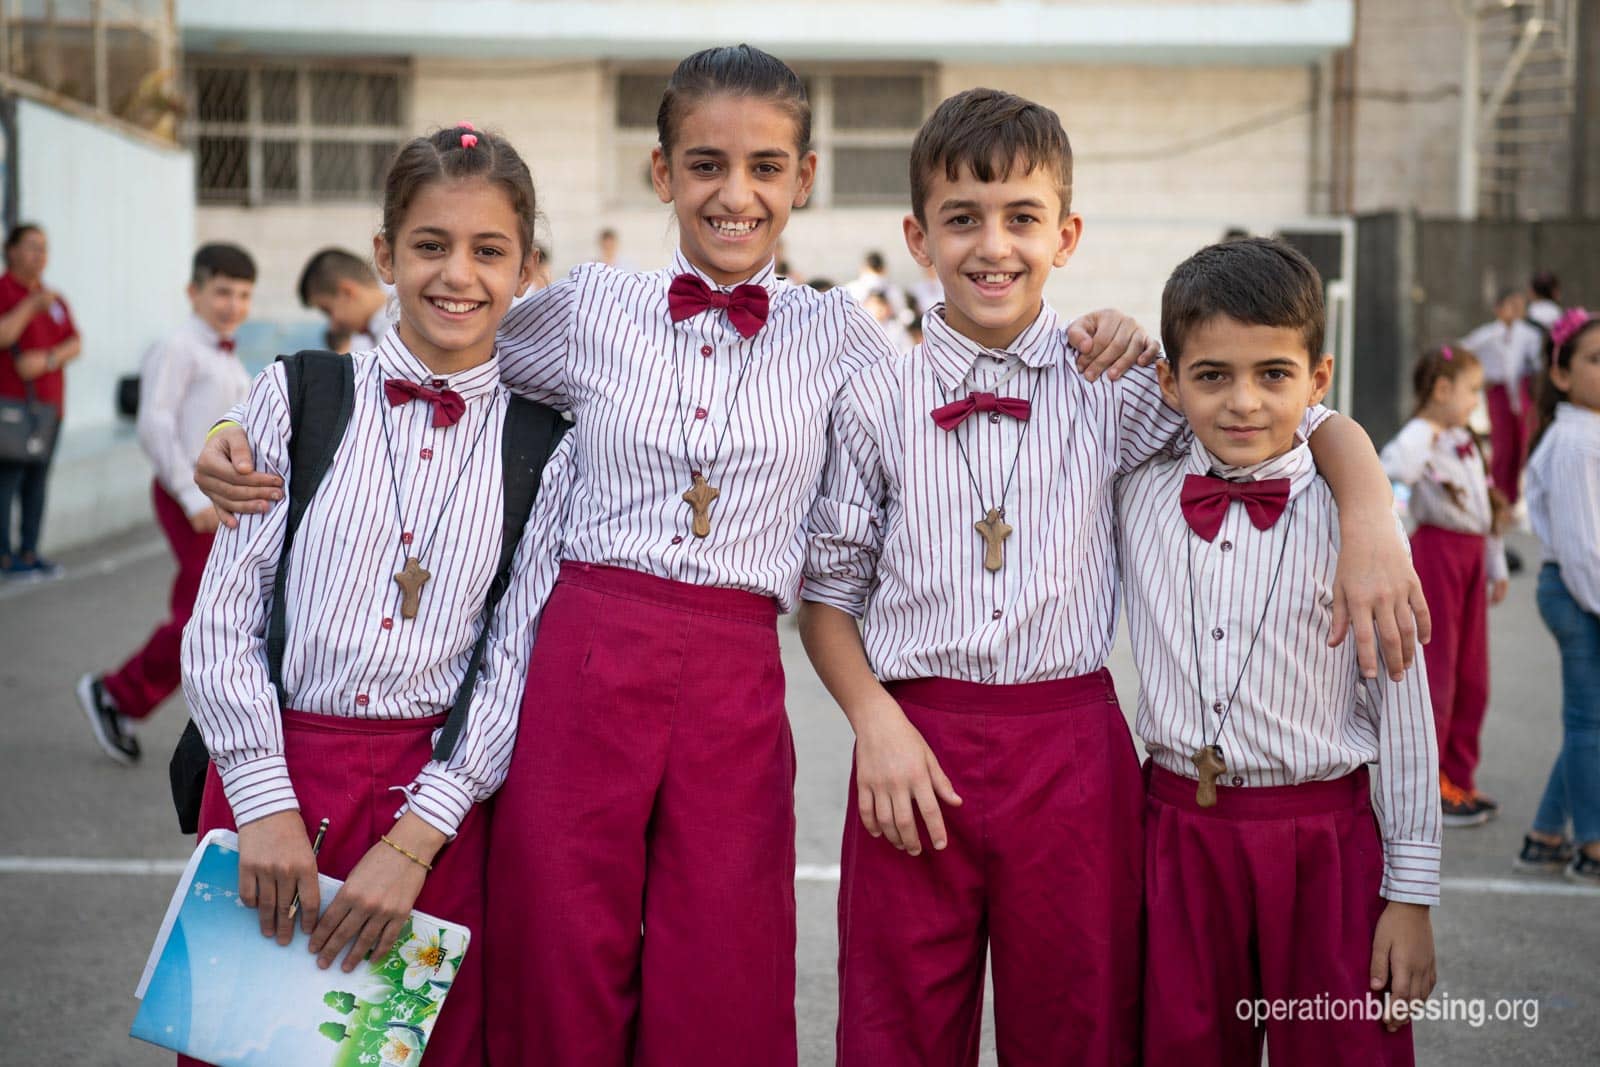 Wisam's children dressed in uniforms for school - part of their new life in a new land.